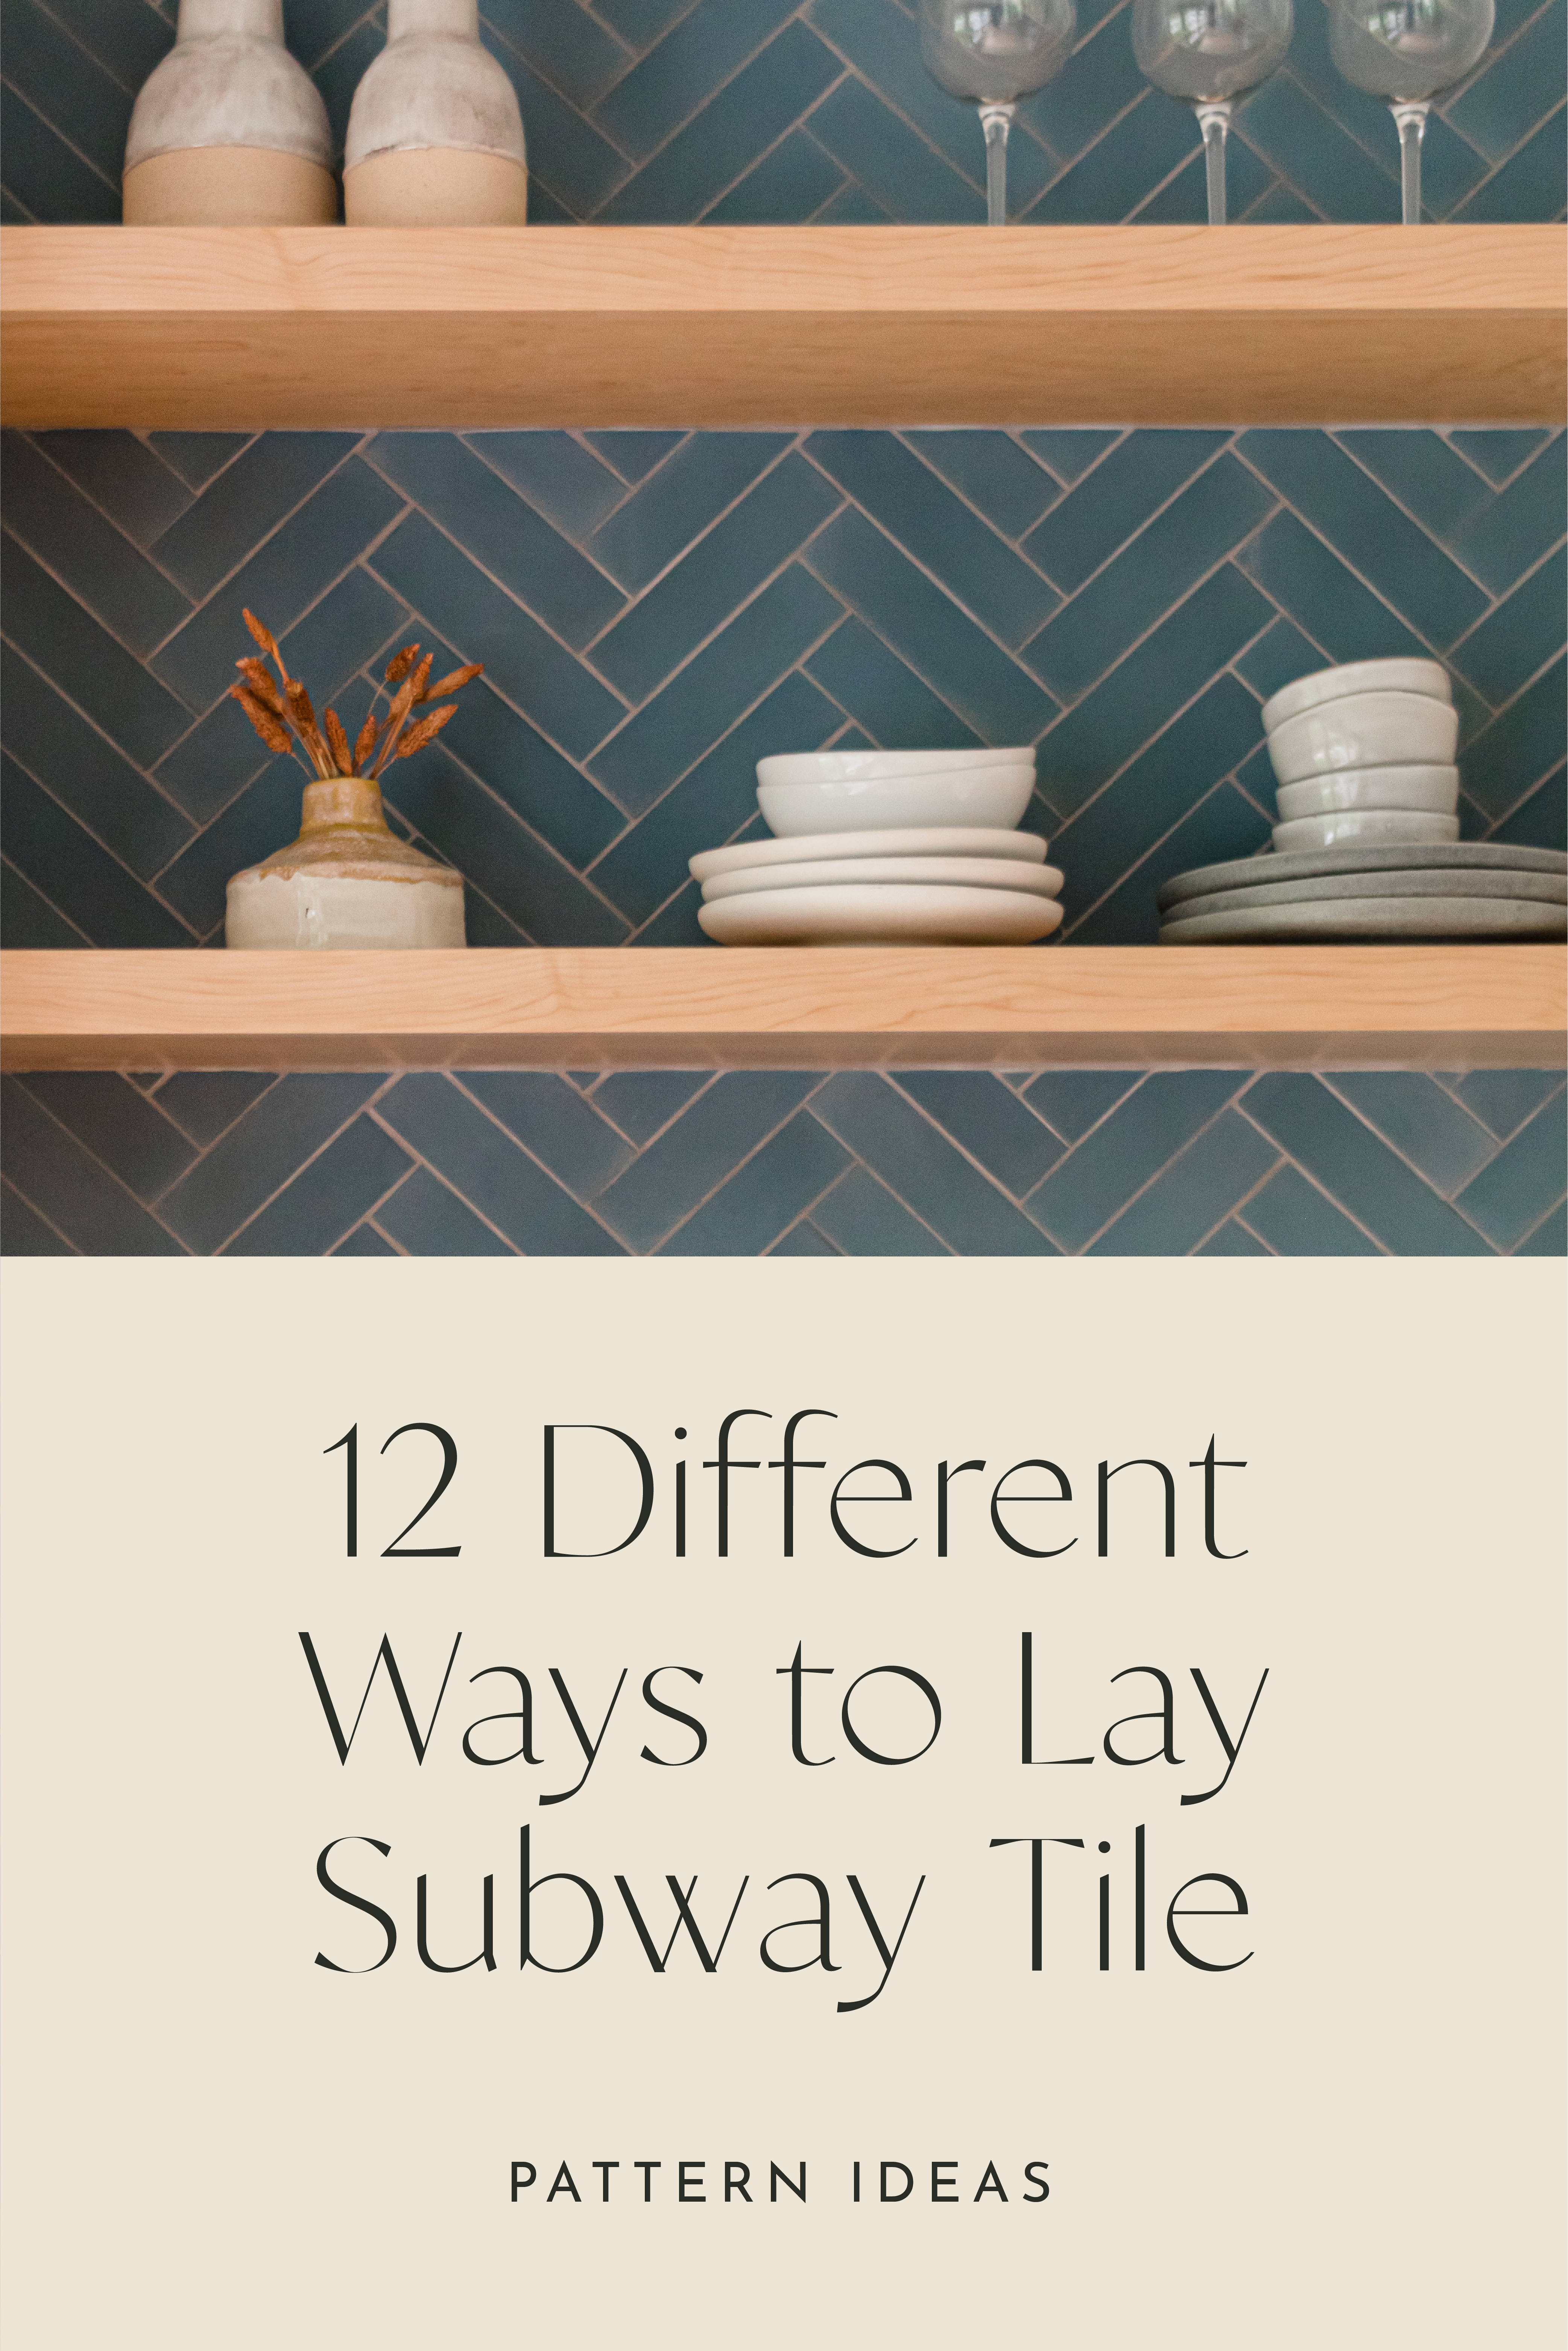 12 Different Subway Tile Patterns & How To Lay Them 1